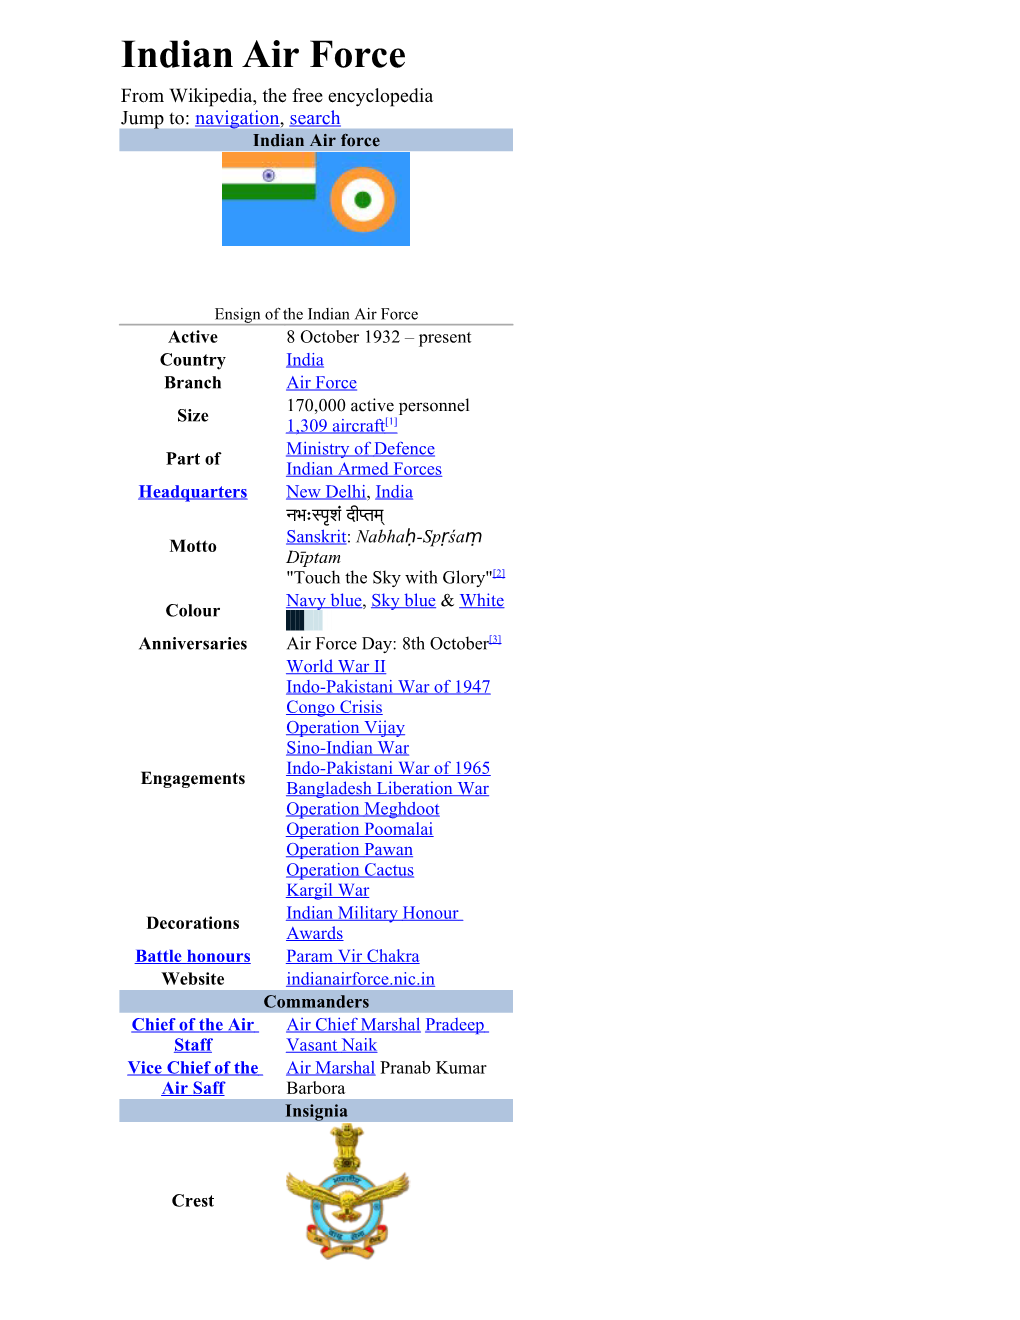 Indian Air Force from Wikipedia, the Free Encyclopedia Jump To: Navigation, Search Indian Air Force